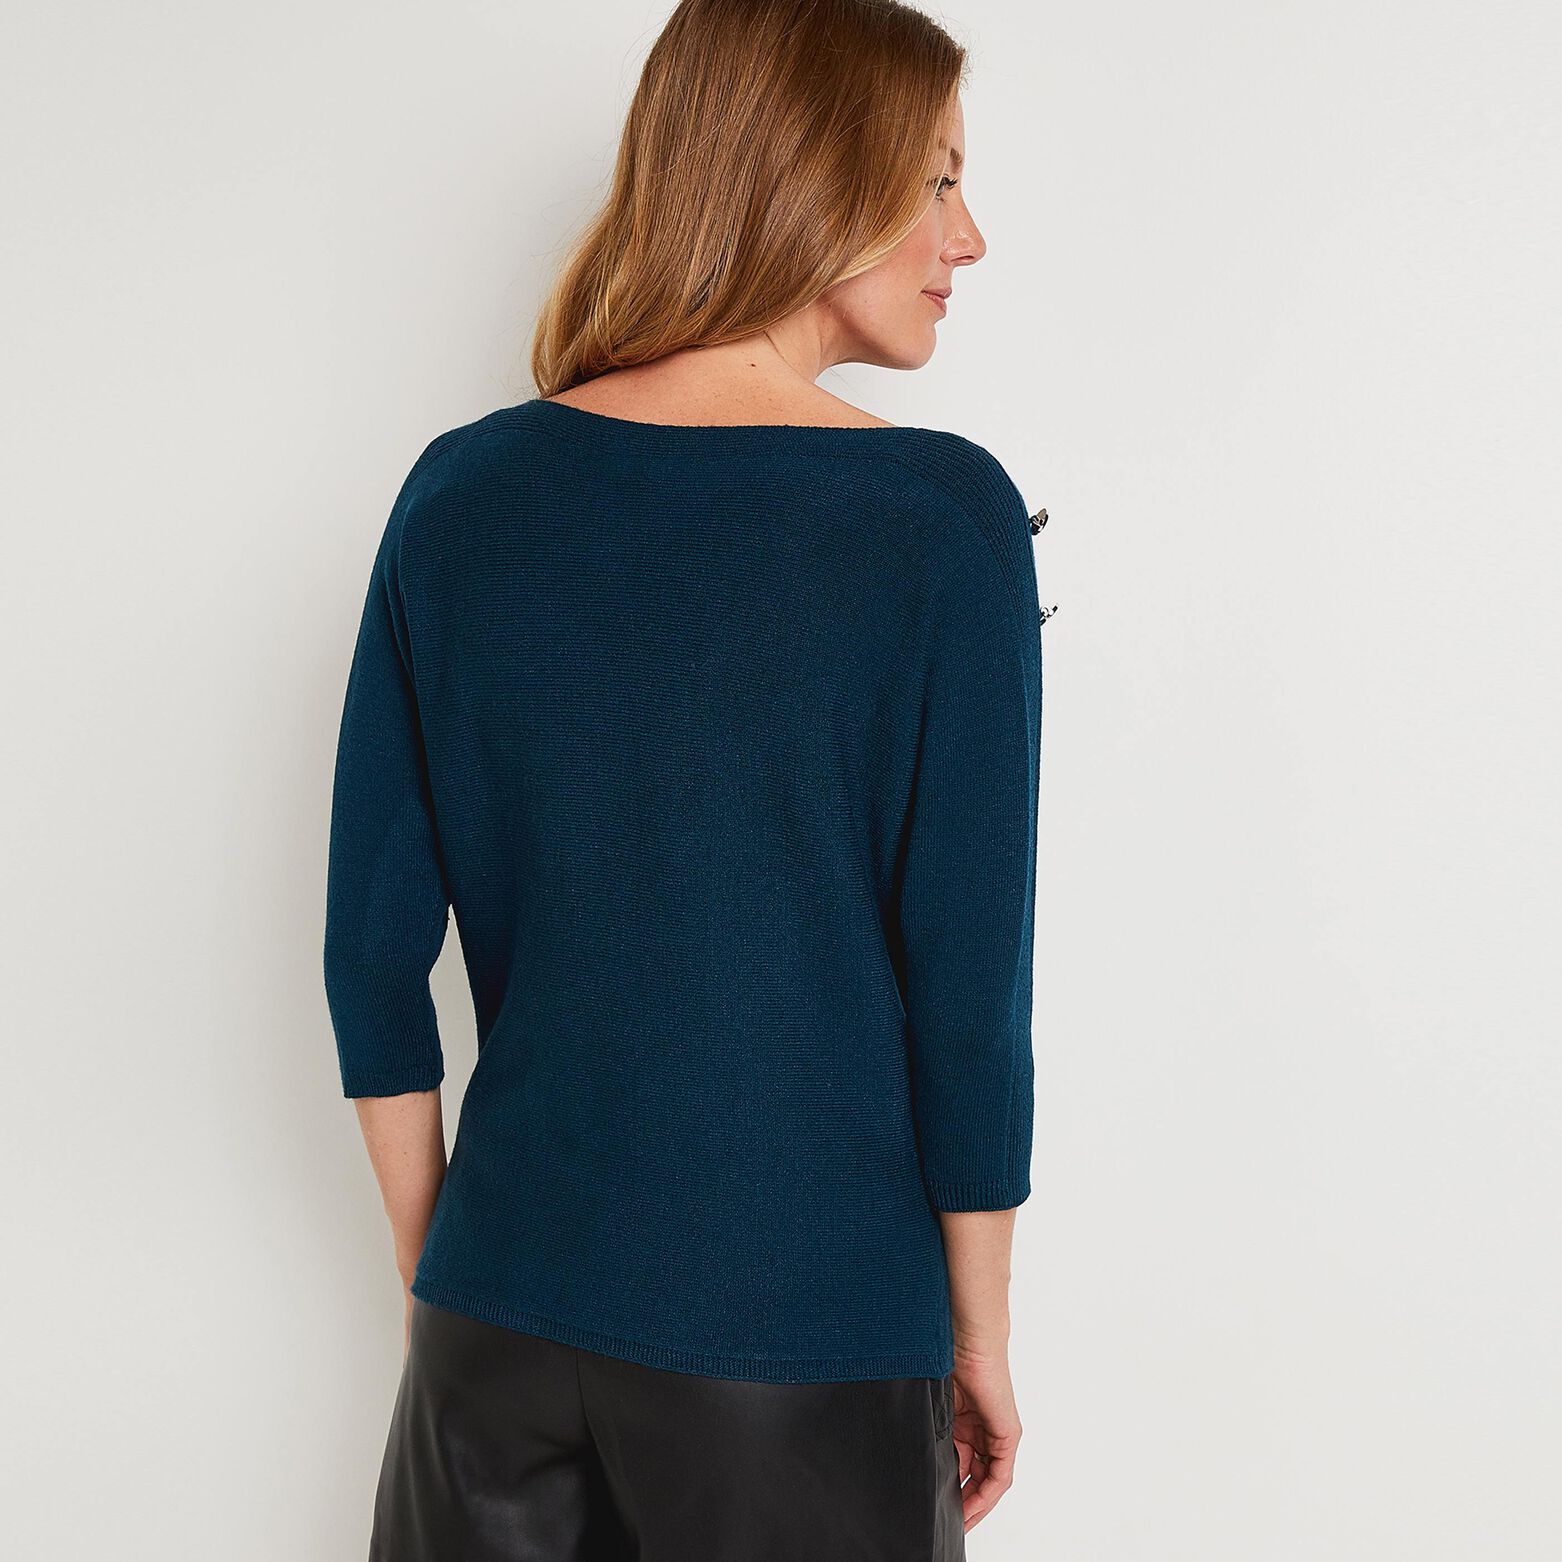 Pull manches 3/4 femme